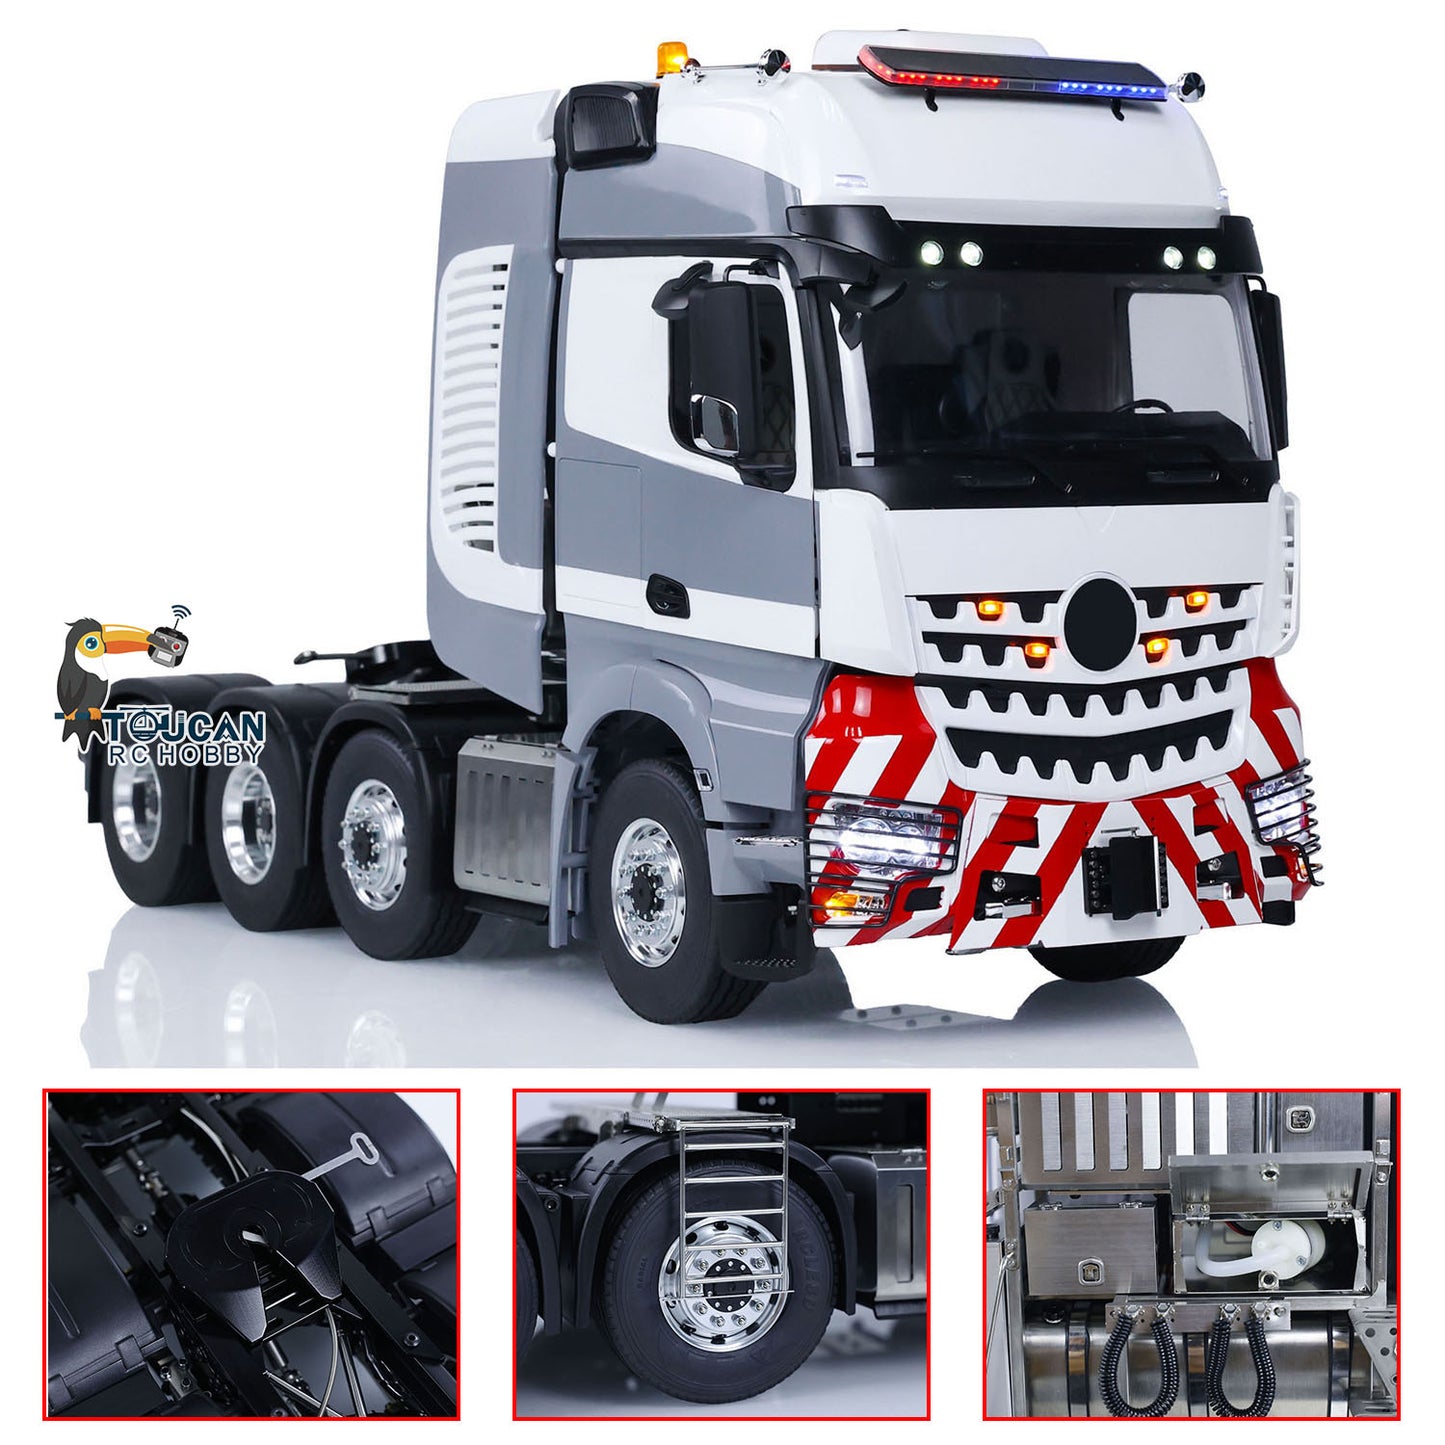 LESU Metal Chassis 8x8 RC Tractor Truck 1/14 Radio Controlled Cars Smoke Unit Sound 1851 3363 PNP RTR Version DIY Parts